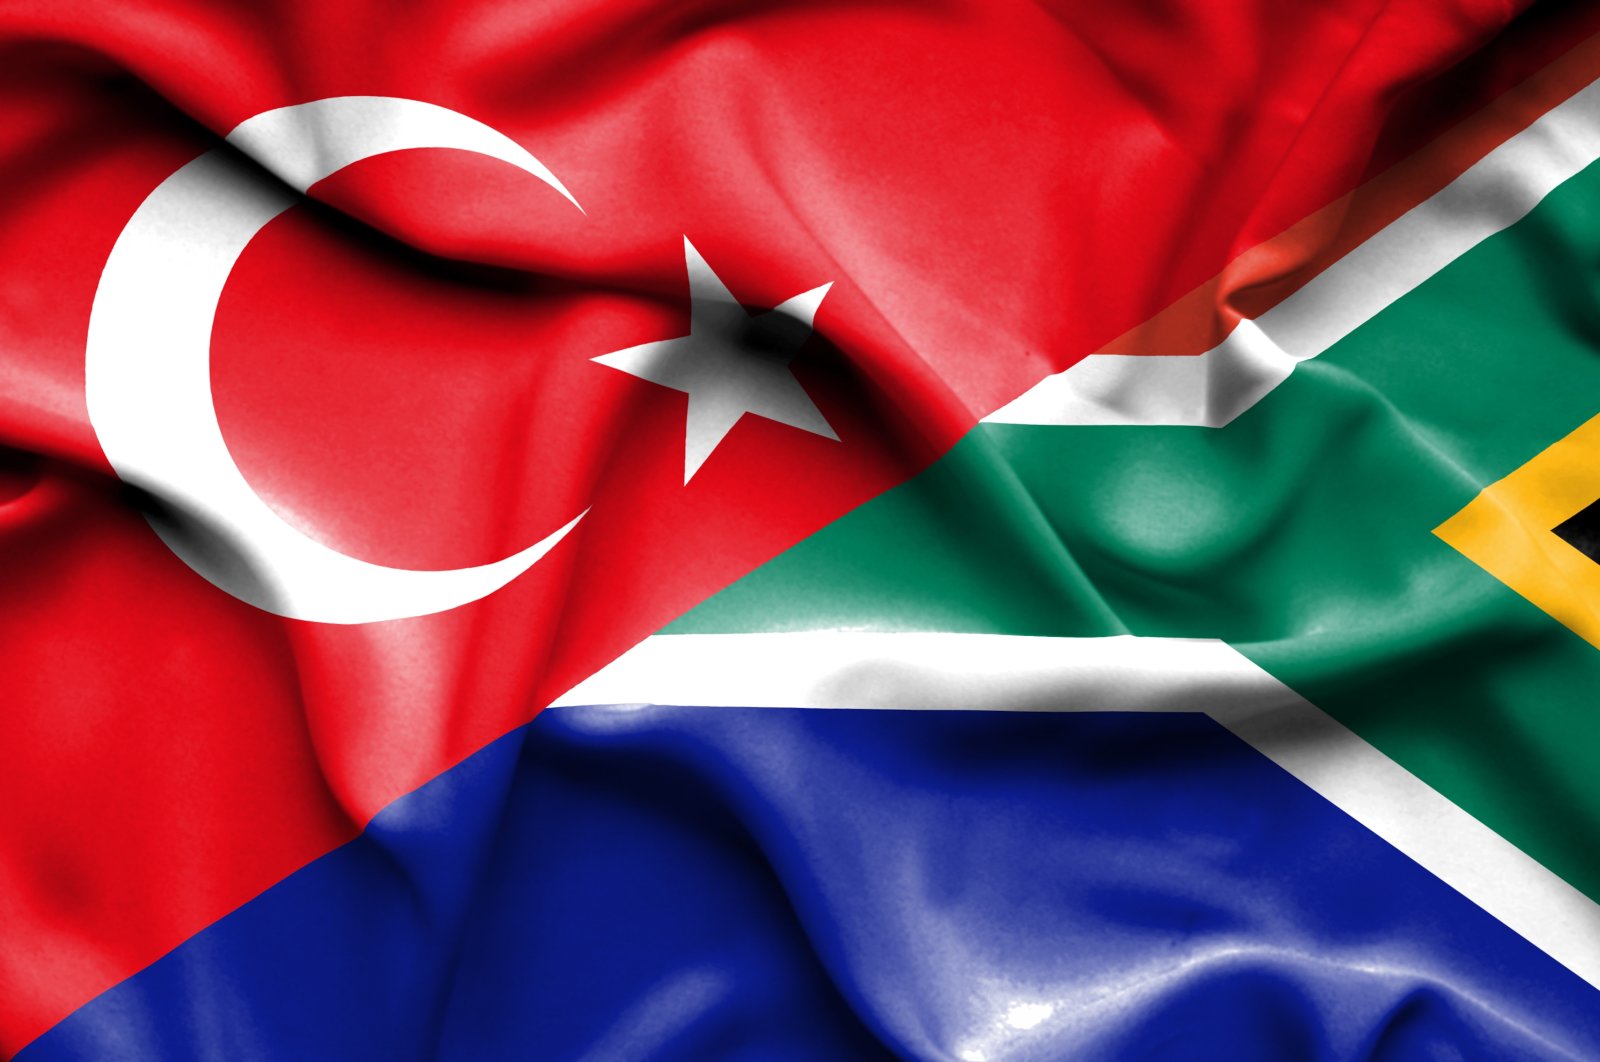 The Turkish and South African flags are seen together. (Illustration by Shutterstock)